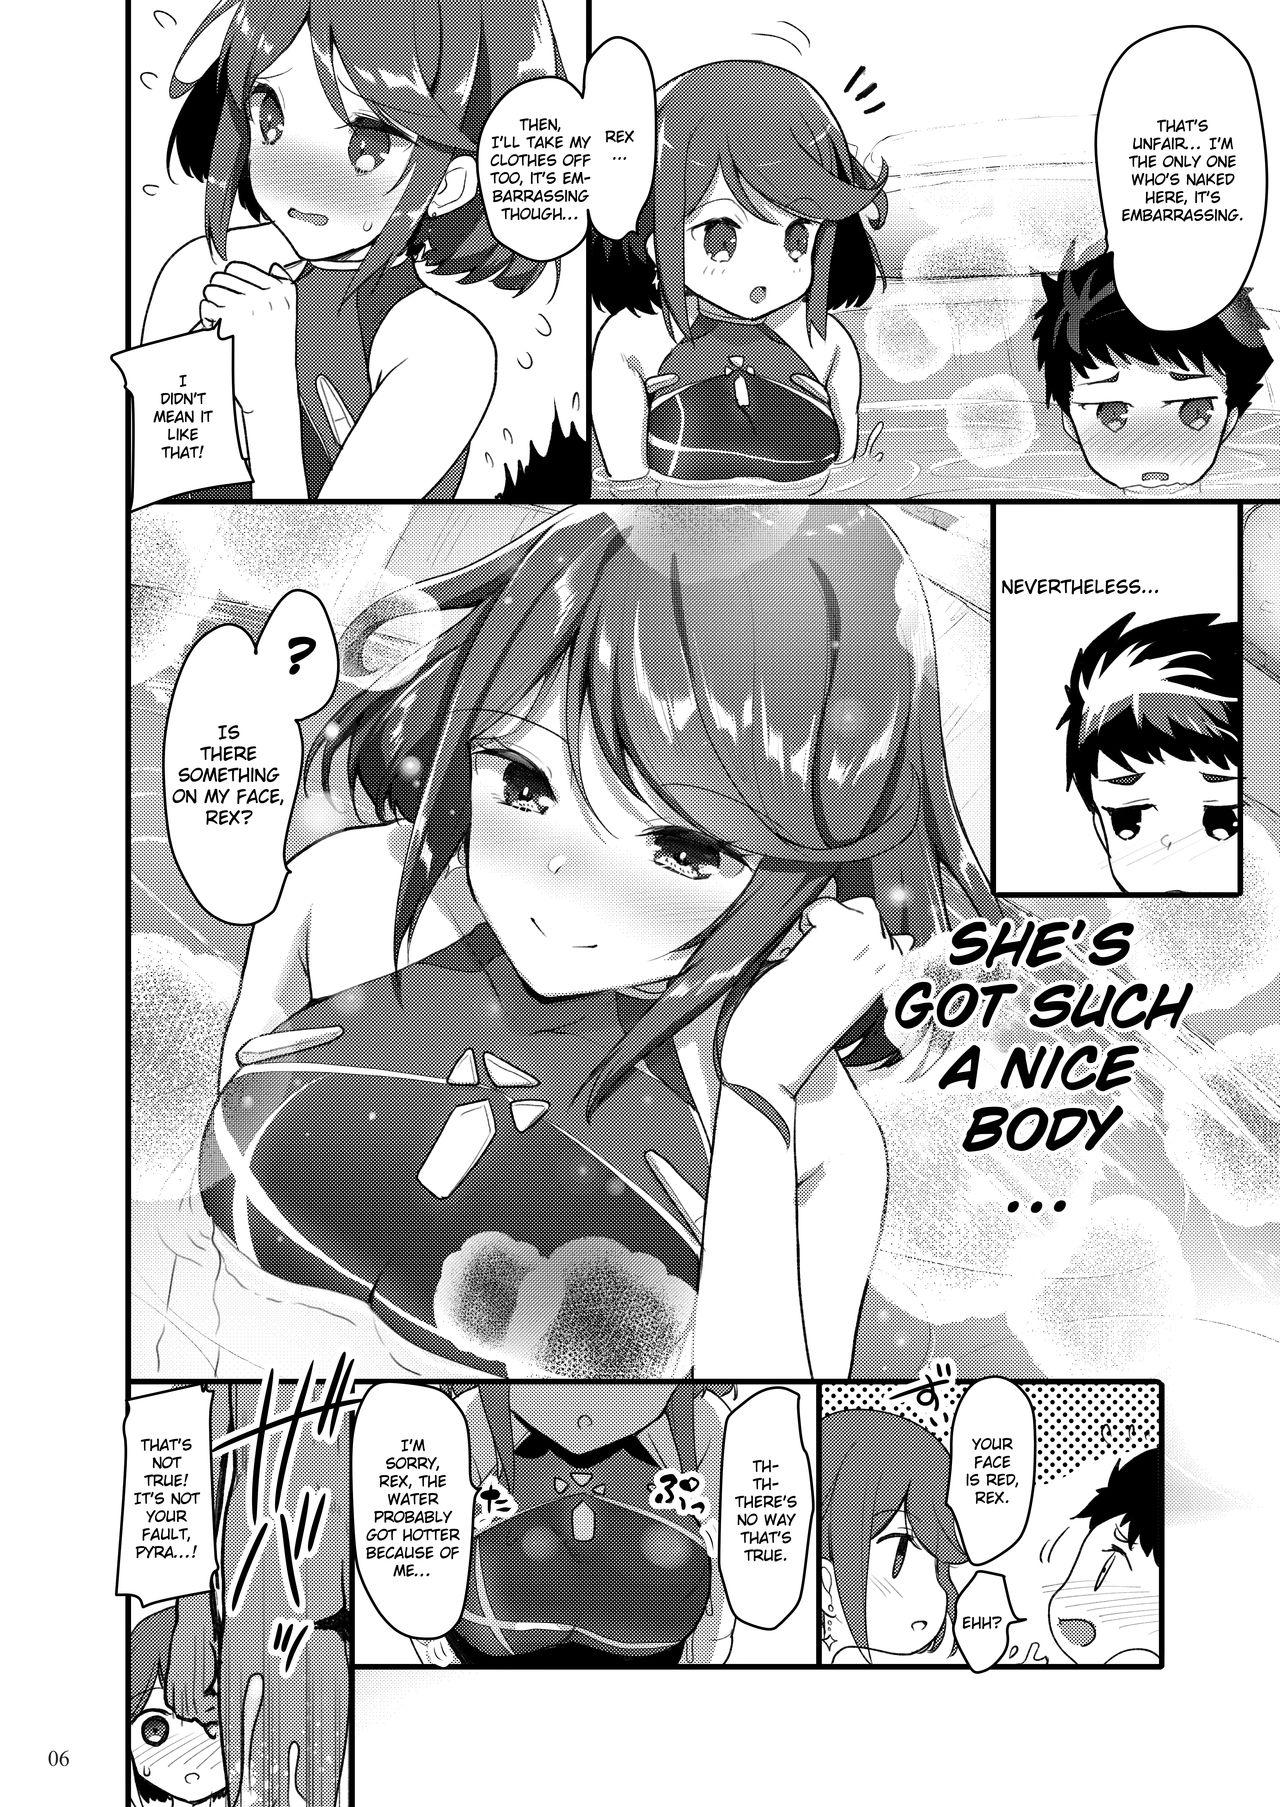 Brazzers Superbia no Amai Yoru - Xenoblade chronicles 2 Hot Cunt - Page 4